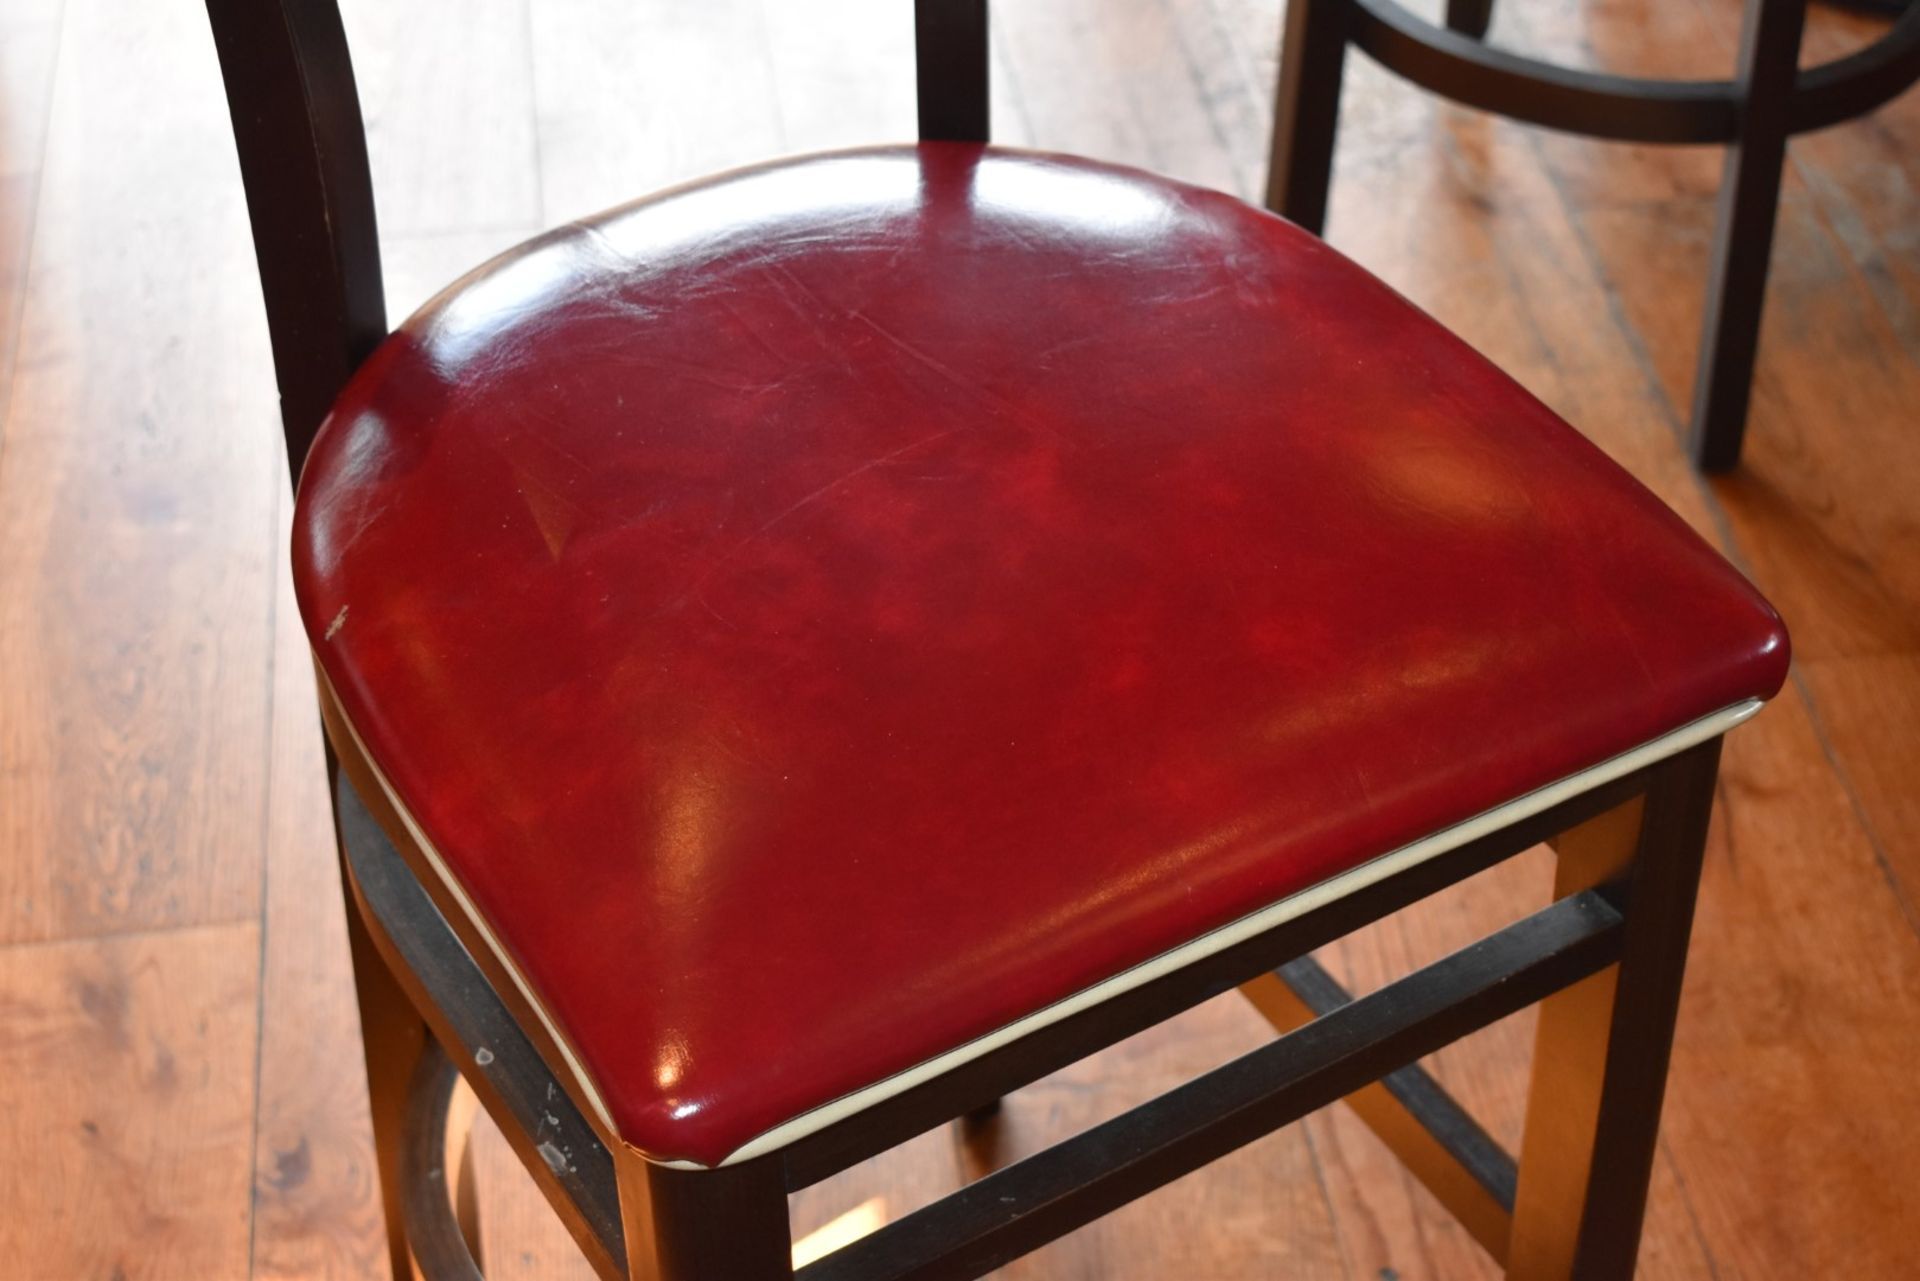 4 x Wine Red Faux Leather Bar Stools From Italian American Restaurant - Retro Design With Dark - Image 5 of 5